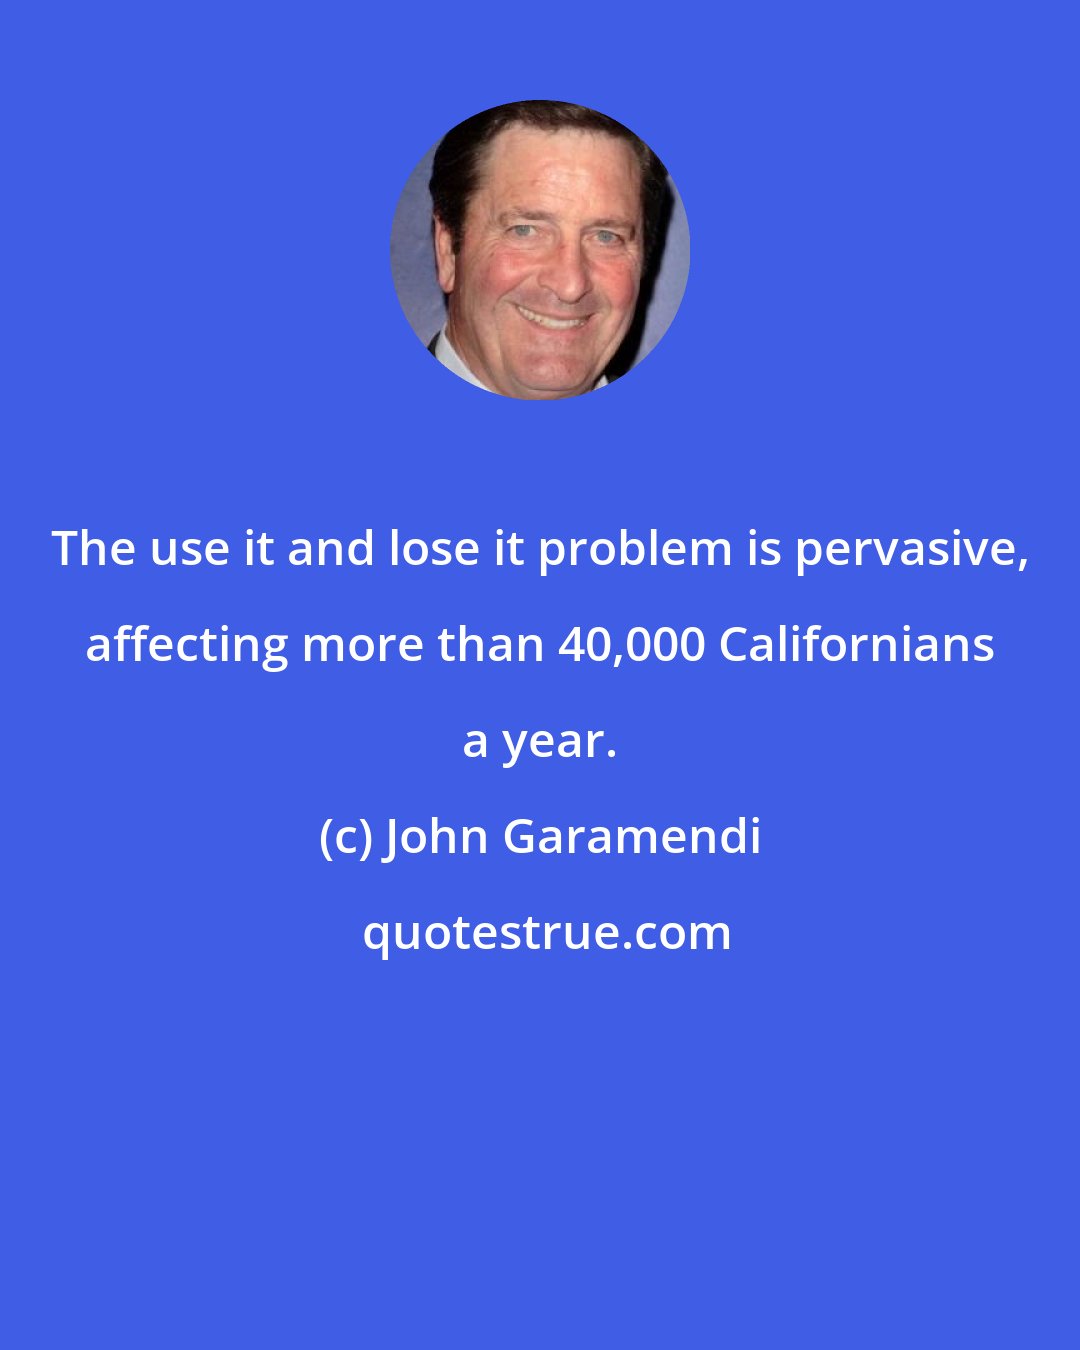 John Garamendi: The use it and lose it problem is pervasive, affecting more than 40,000 Californians a year.